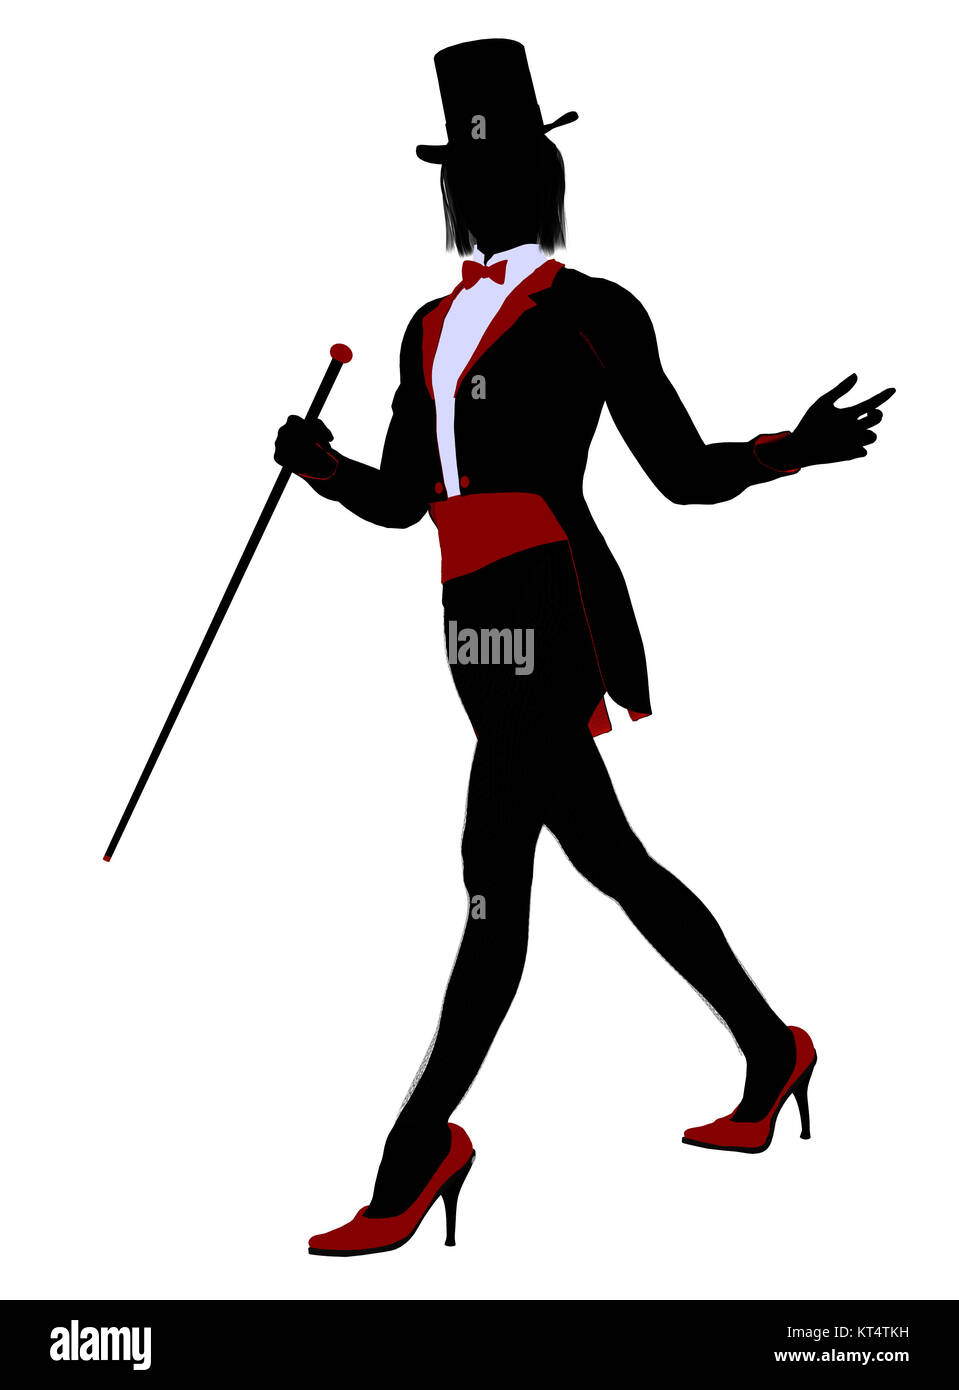 Female magician silhouette illustration on a white background Stock Photo